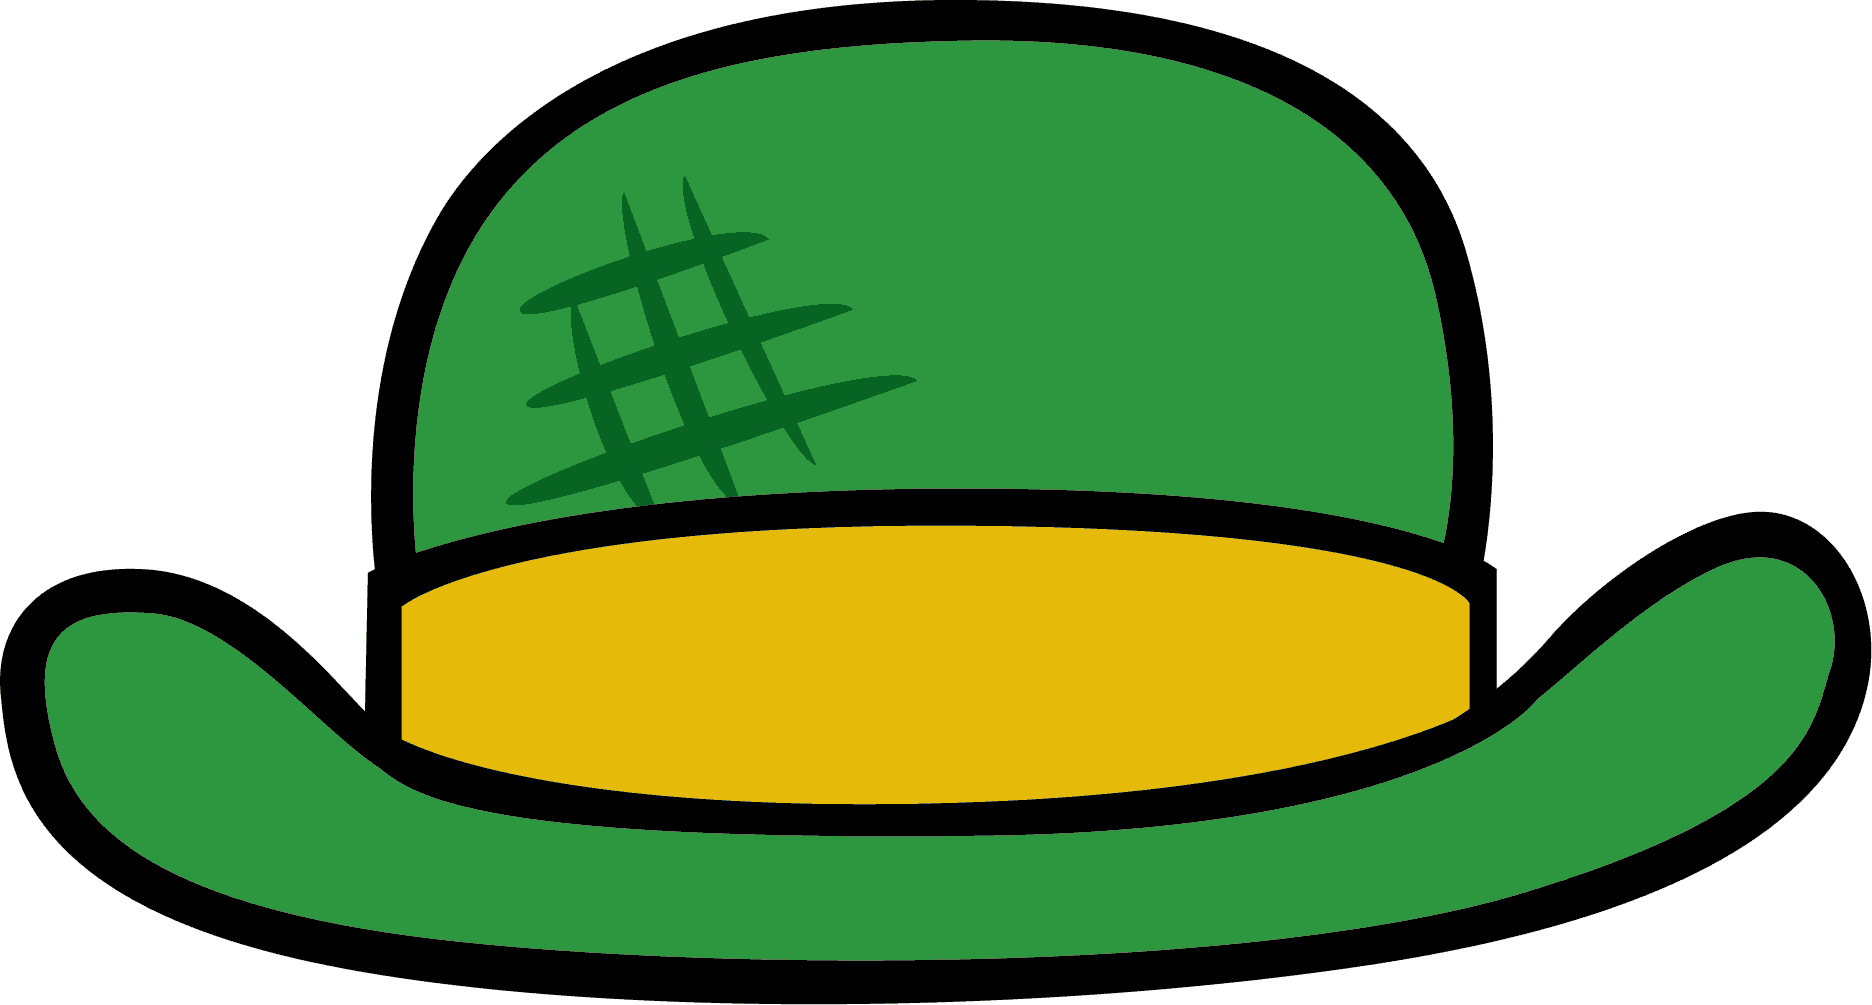 wool hat clipart - photo #37